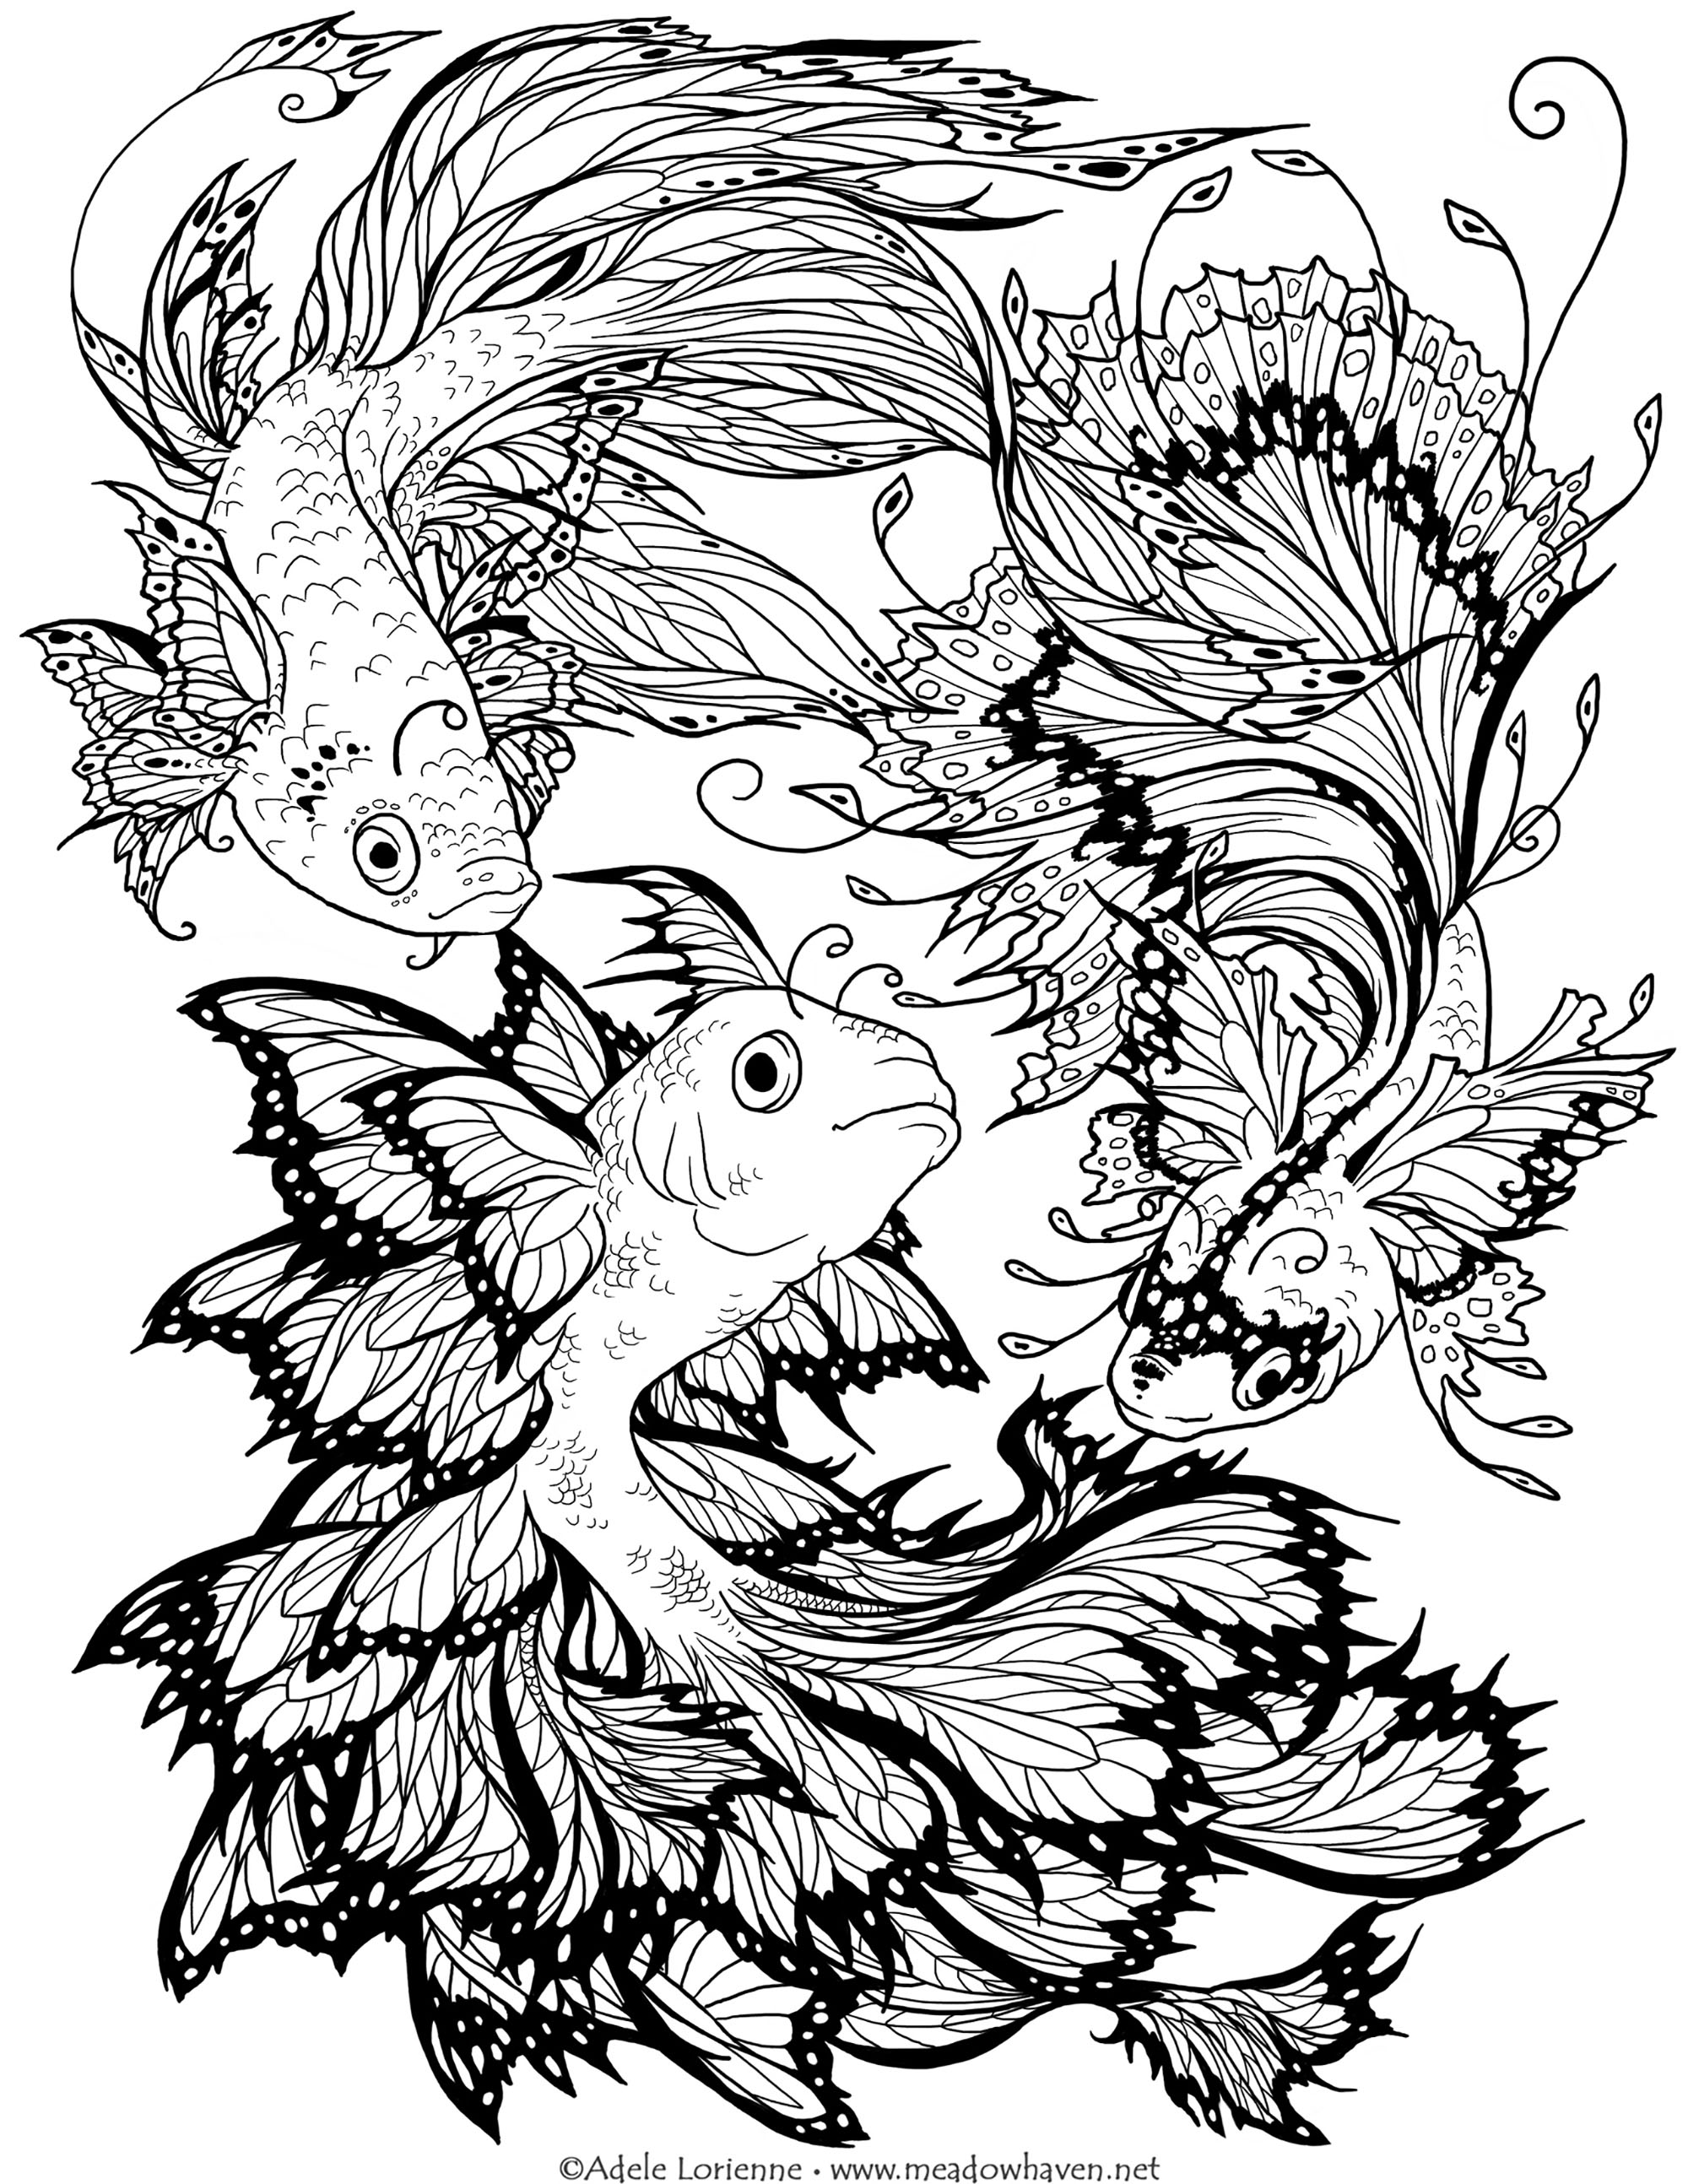 Flutter fishes - Fishes Adult Coloring Pages